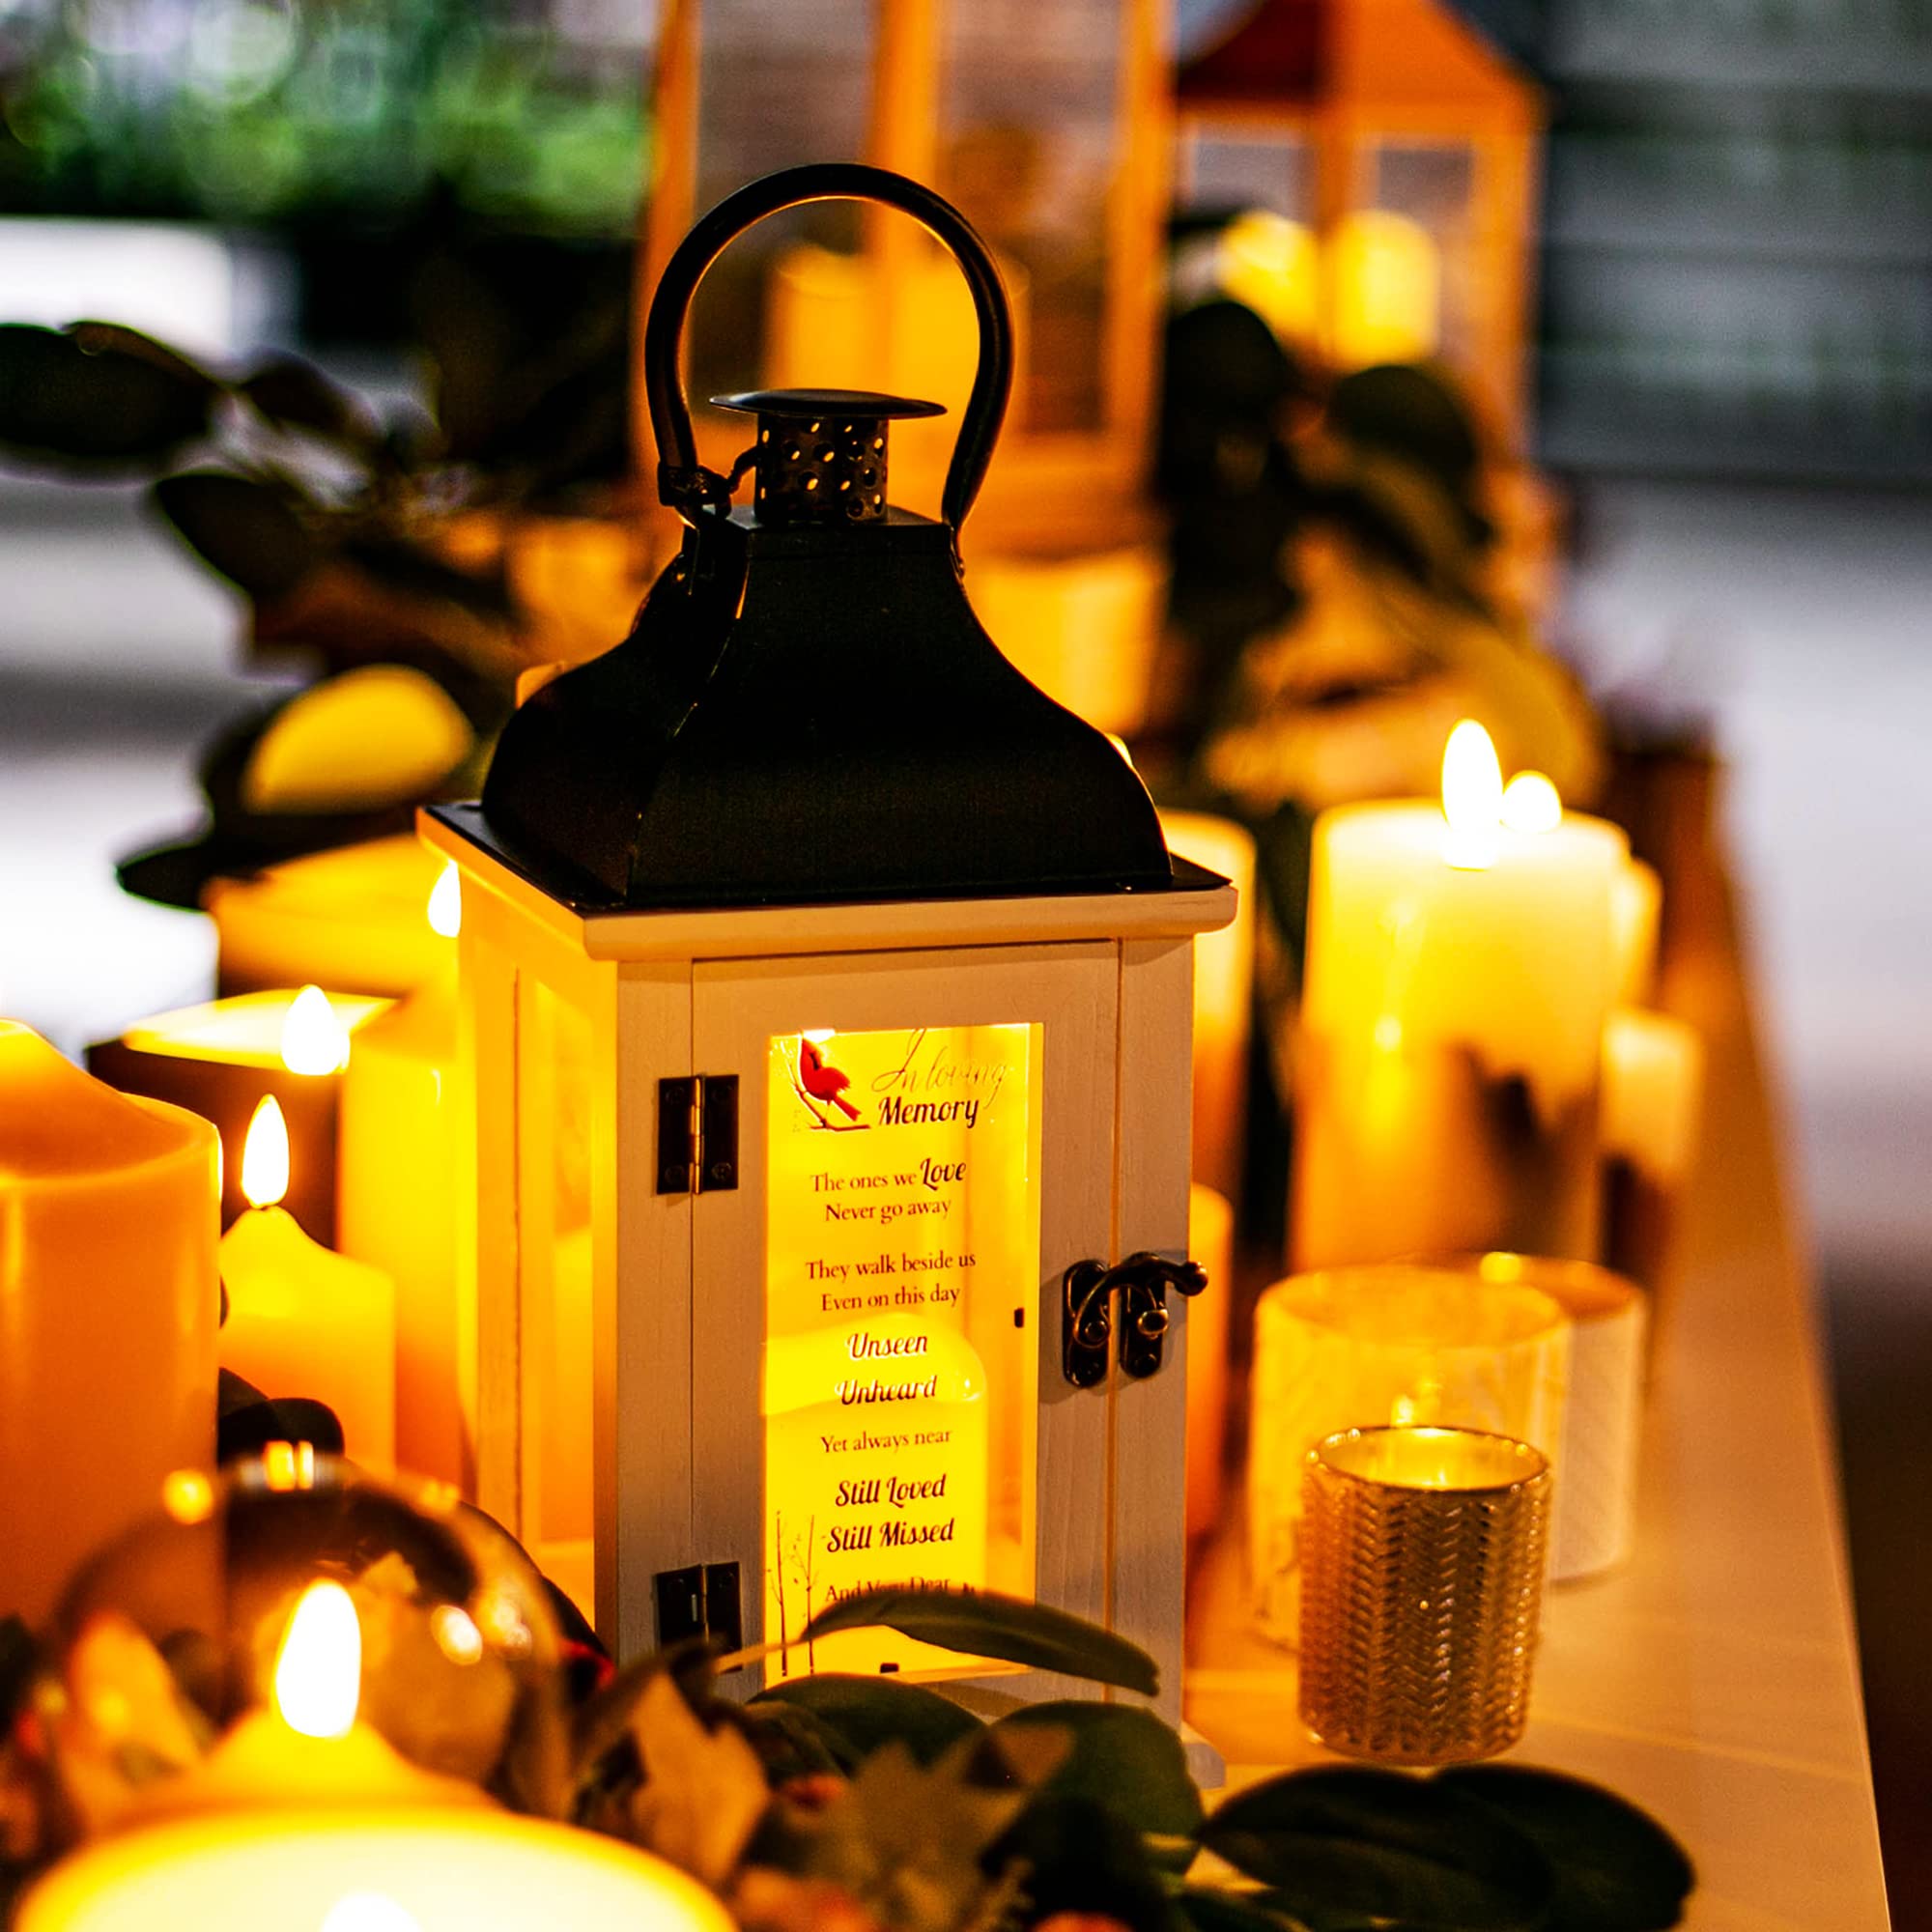 Memorial Lantern - Bereavement Sympathy Gifts for Loss of Loved One Memorial Gifts for Loss of Mother Loss of Father Remembrance Gifts